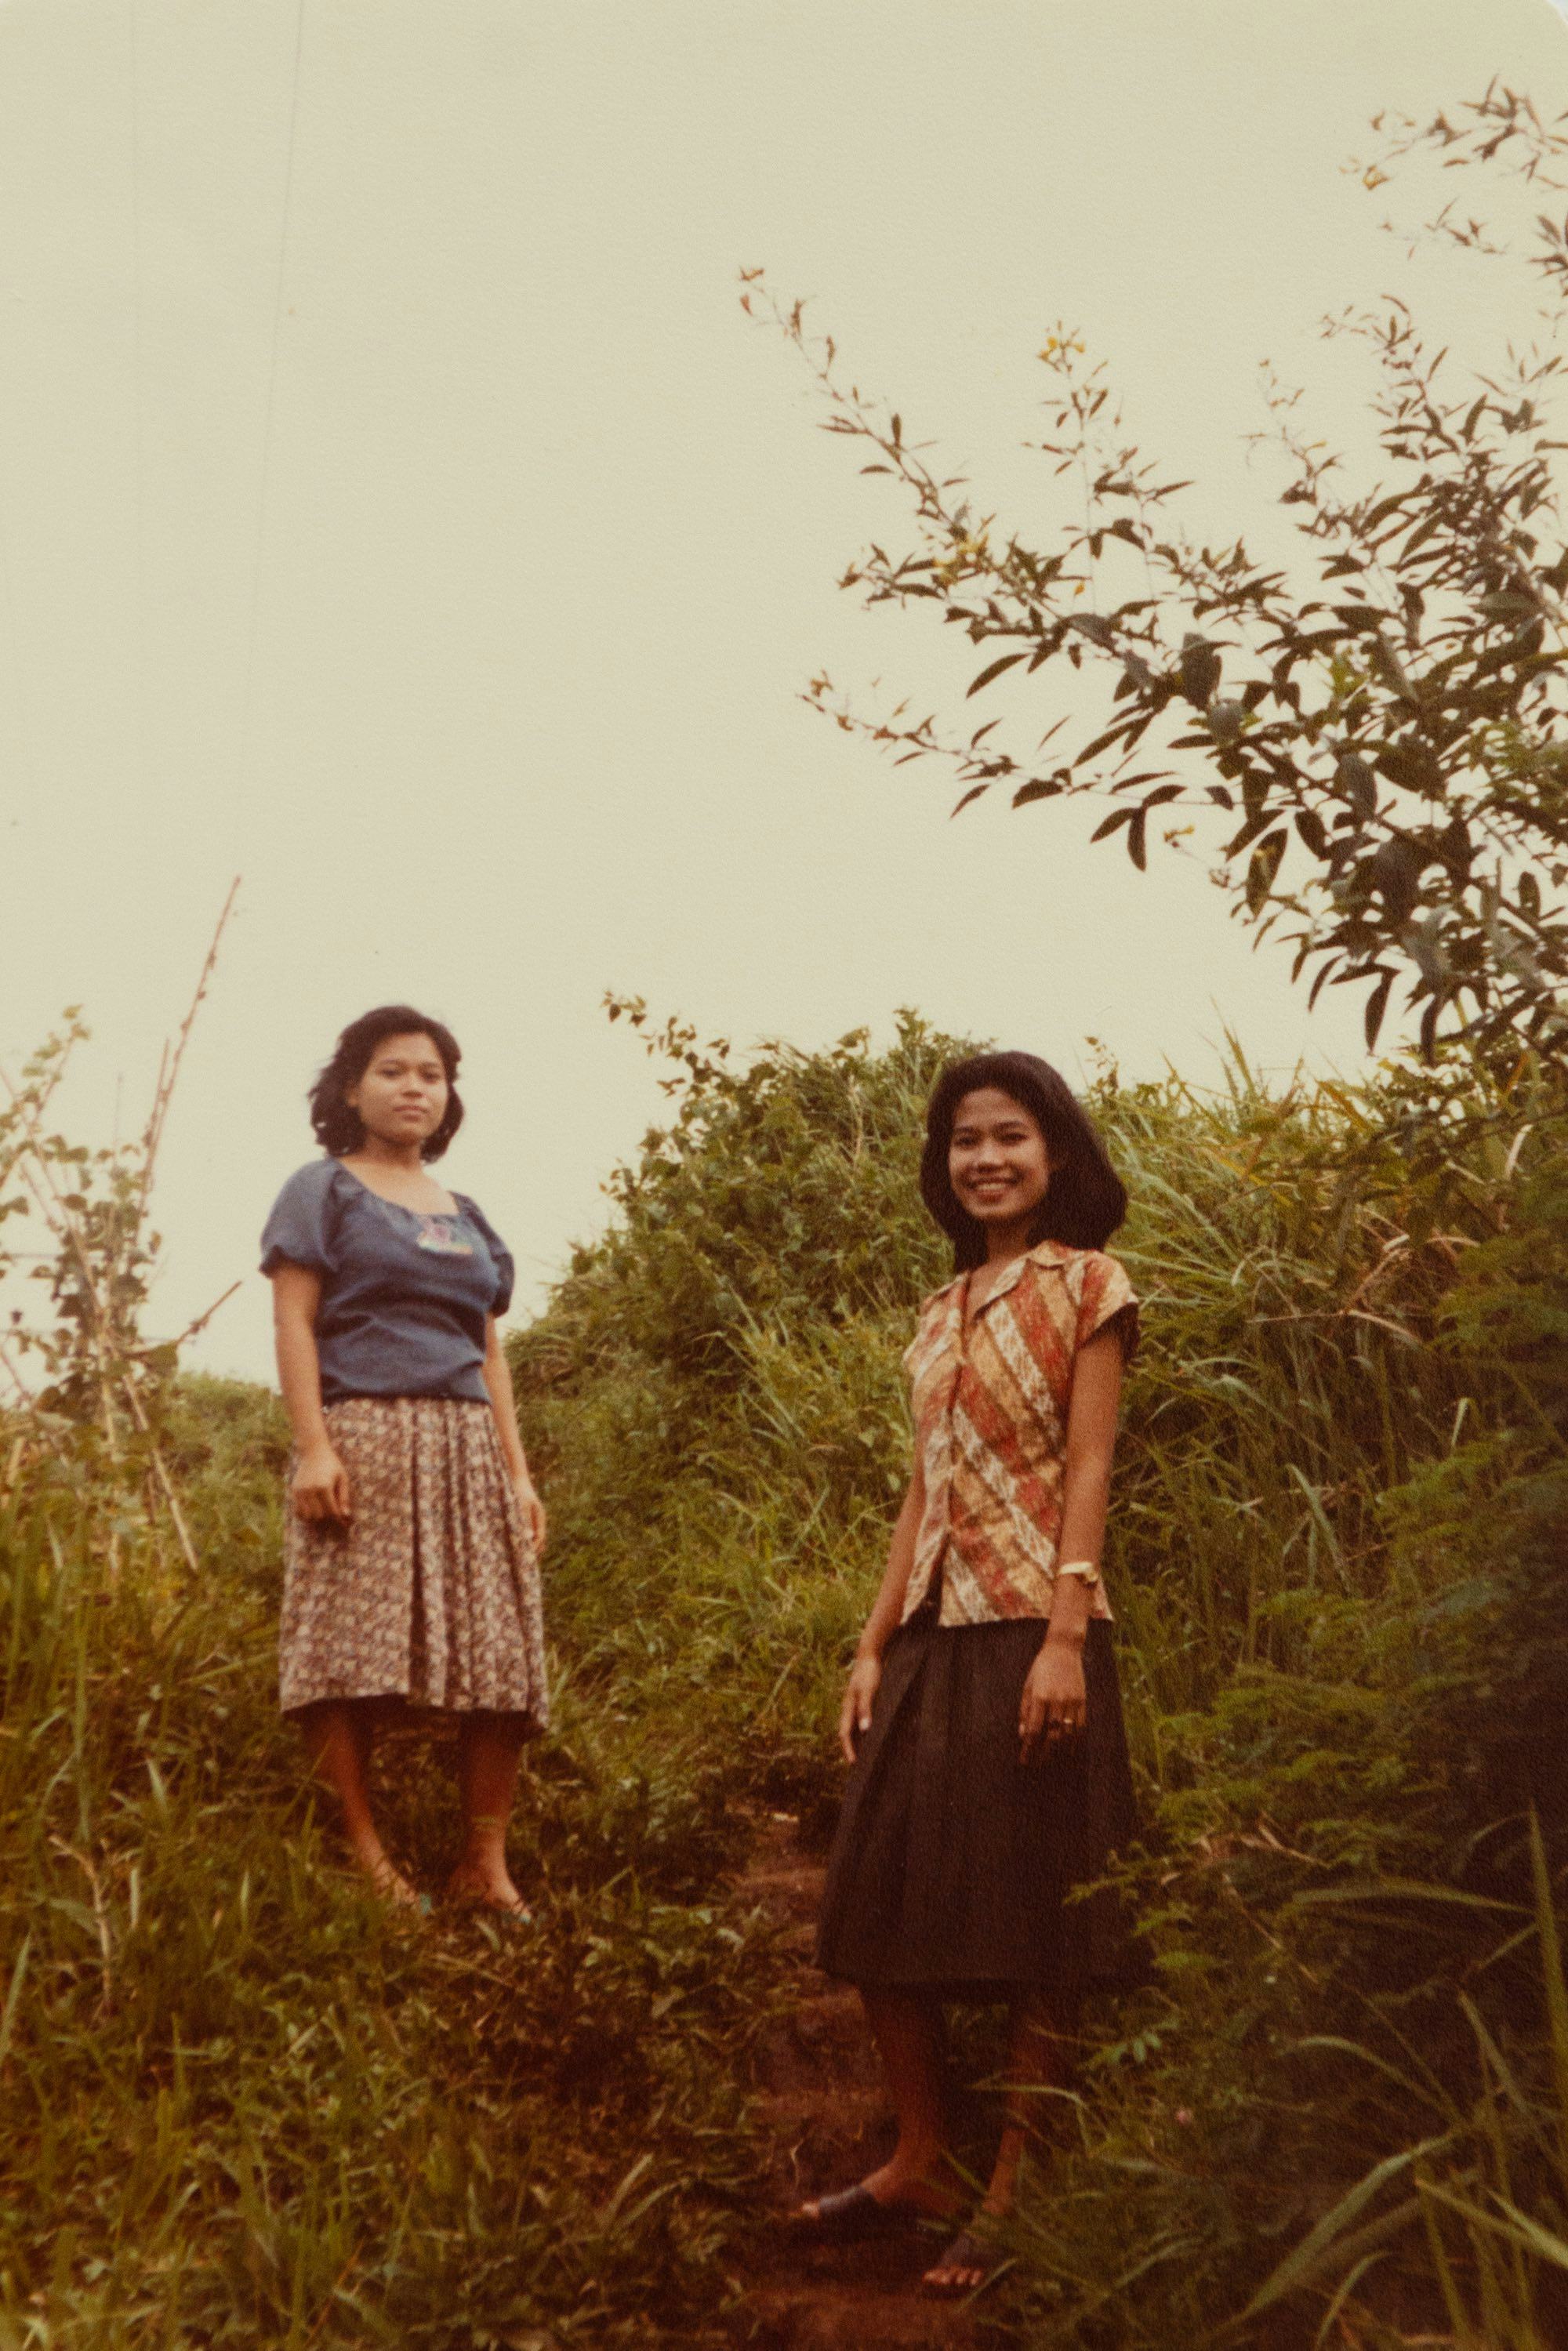 Archival picture from the artist's personal archive, showing two women posing on a hillside© Sander Coers